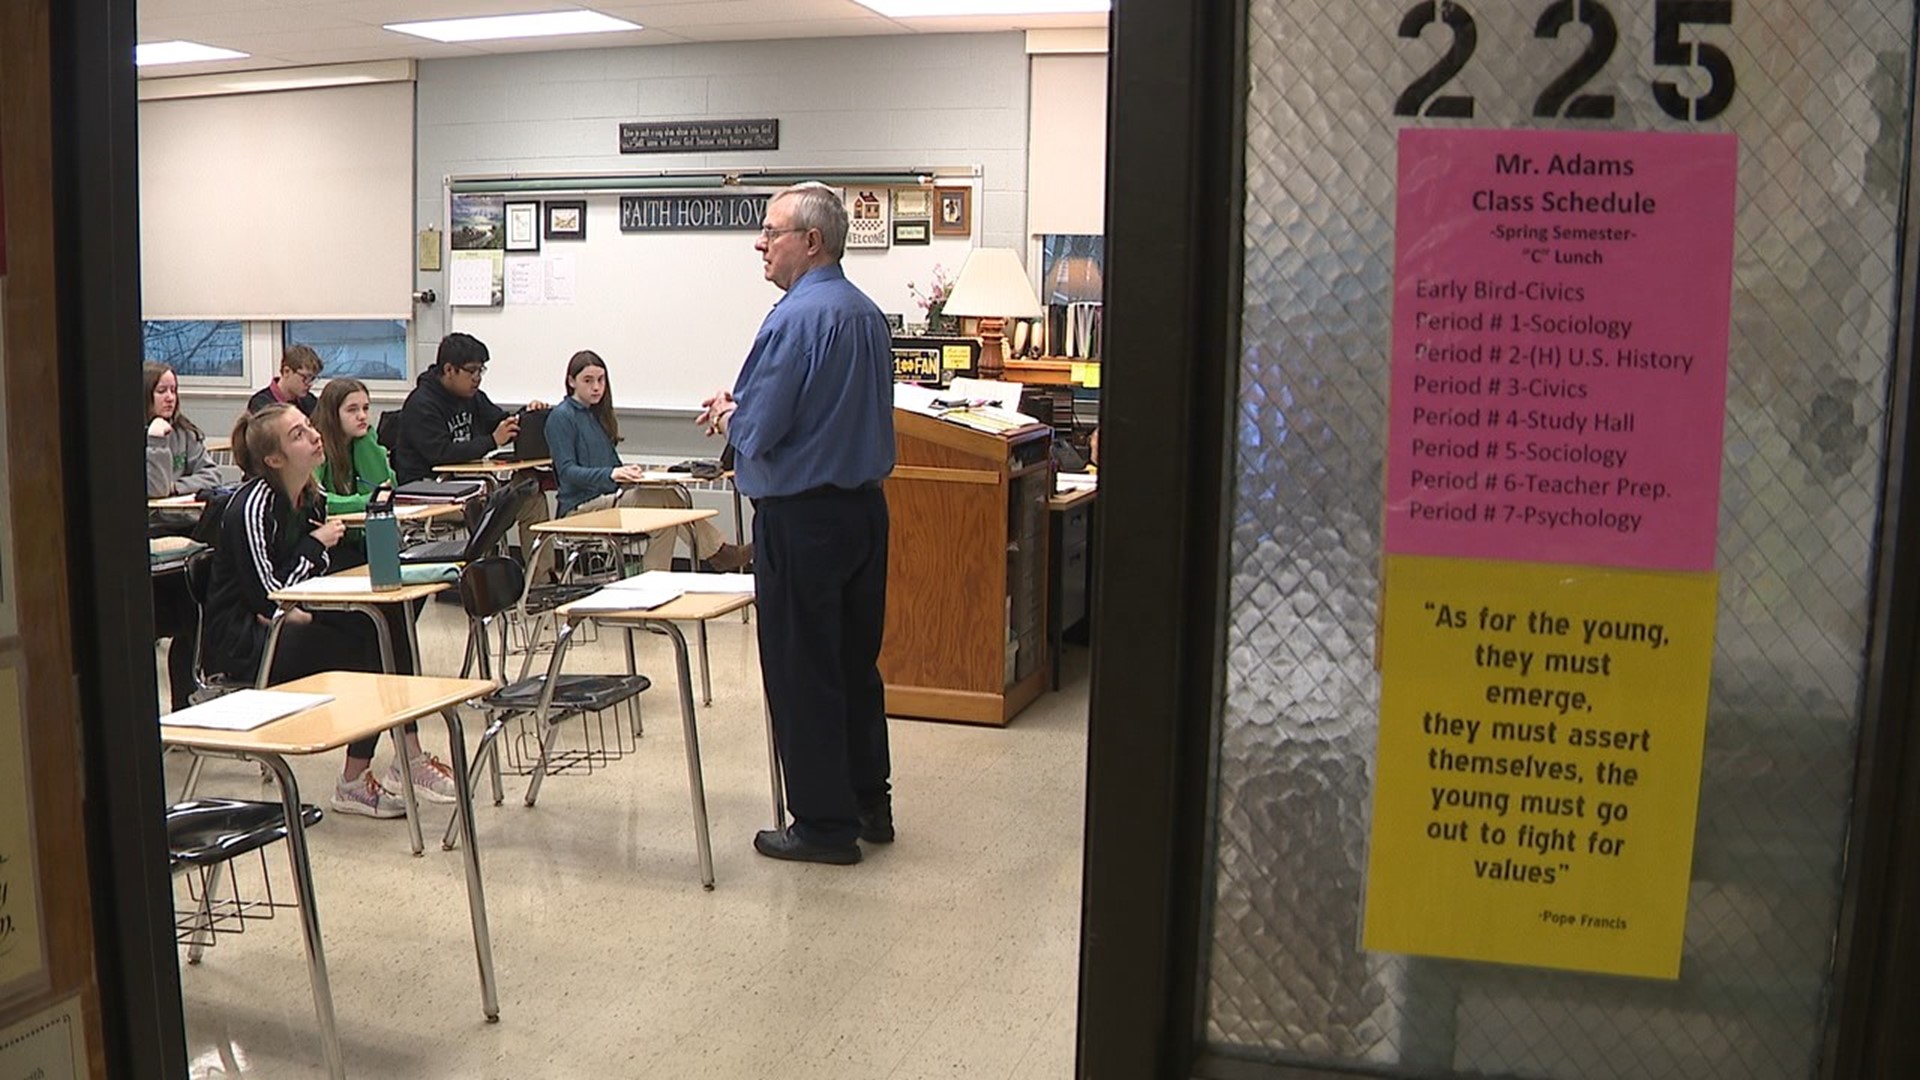 Mr. Don Adams has been a teacher in the civics department for over 40 years and has put in a lot of hard work and dedication to help students learn.